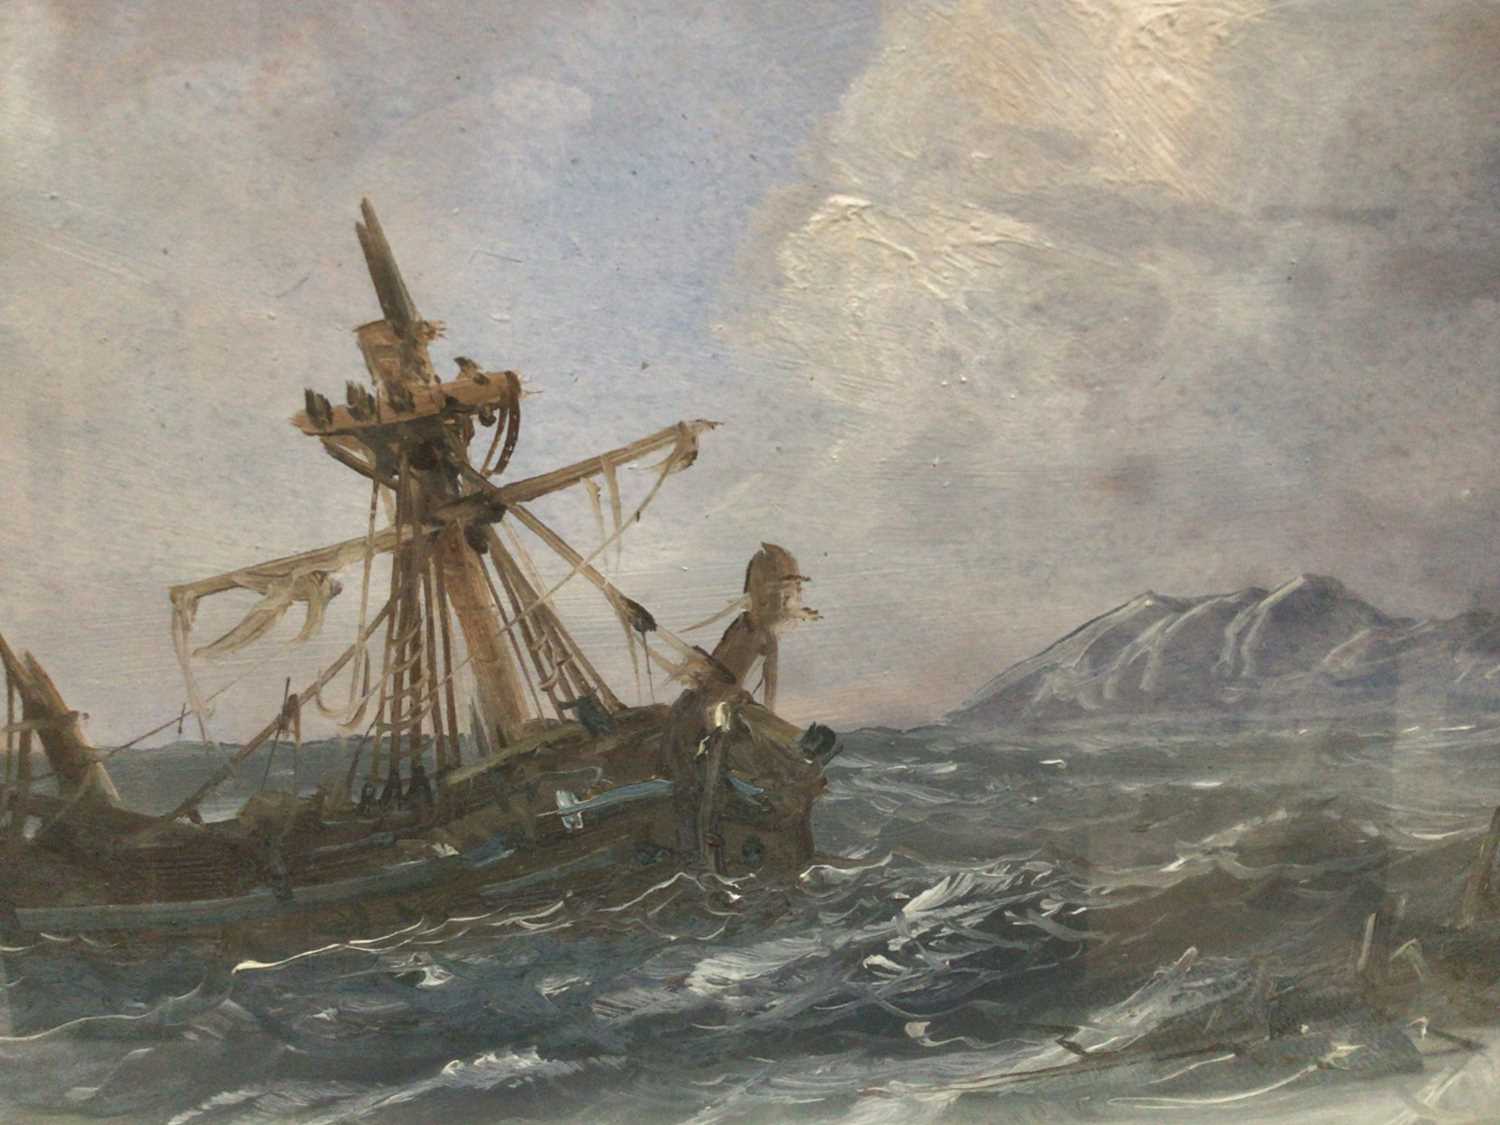 Lot 64 - Pair of late 19th century oils on board - shipping and a shipwreck off the coast, 23cm x 45cm, in glazed frames